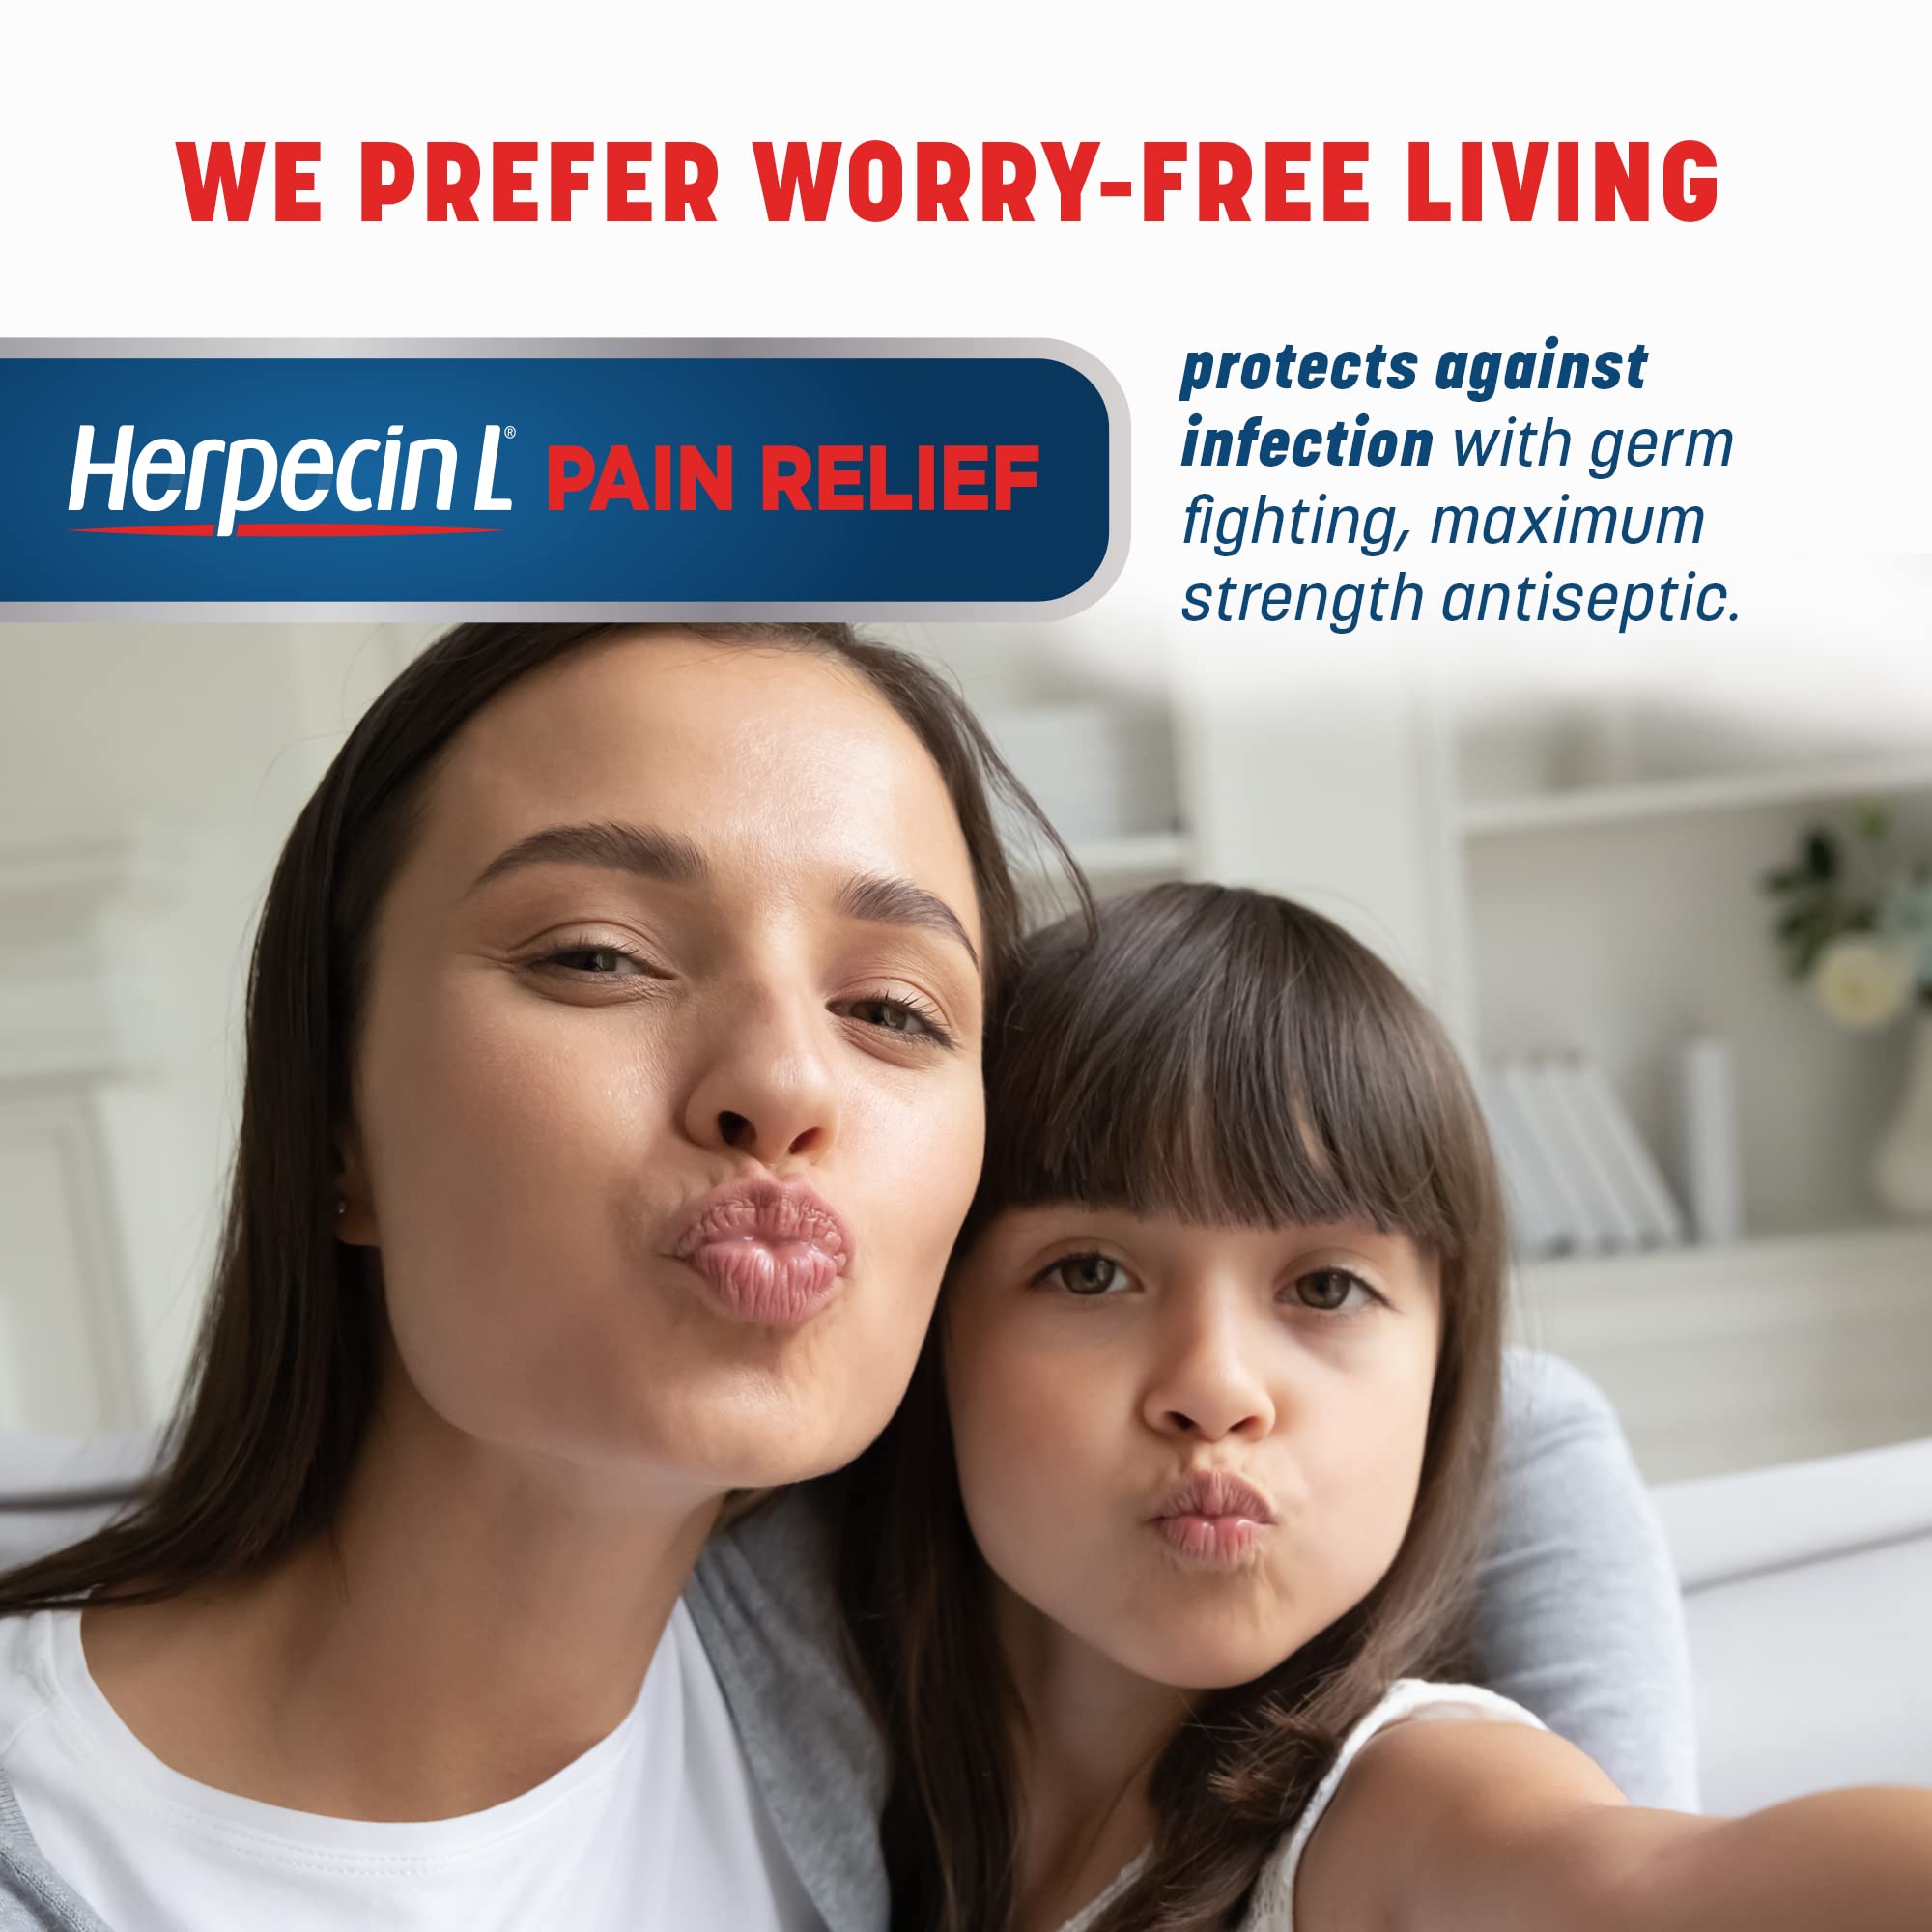 Herpecin-L Pain Relief Triple Action with Lidocaine Cold Sore and Fever Blister Treatment, 0.15 oz